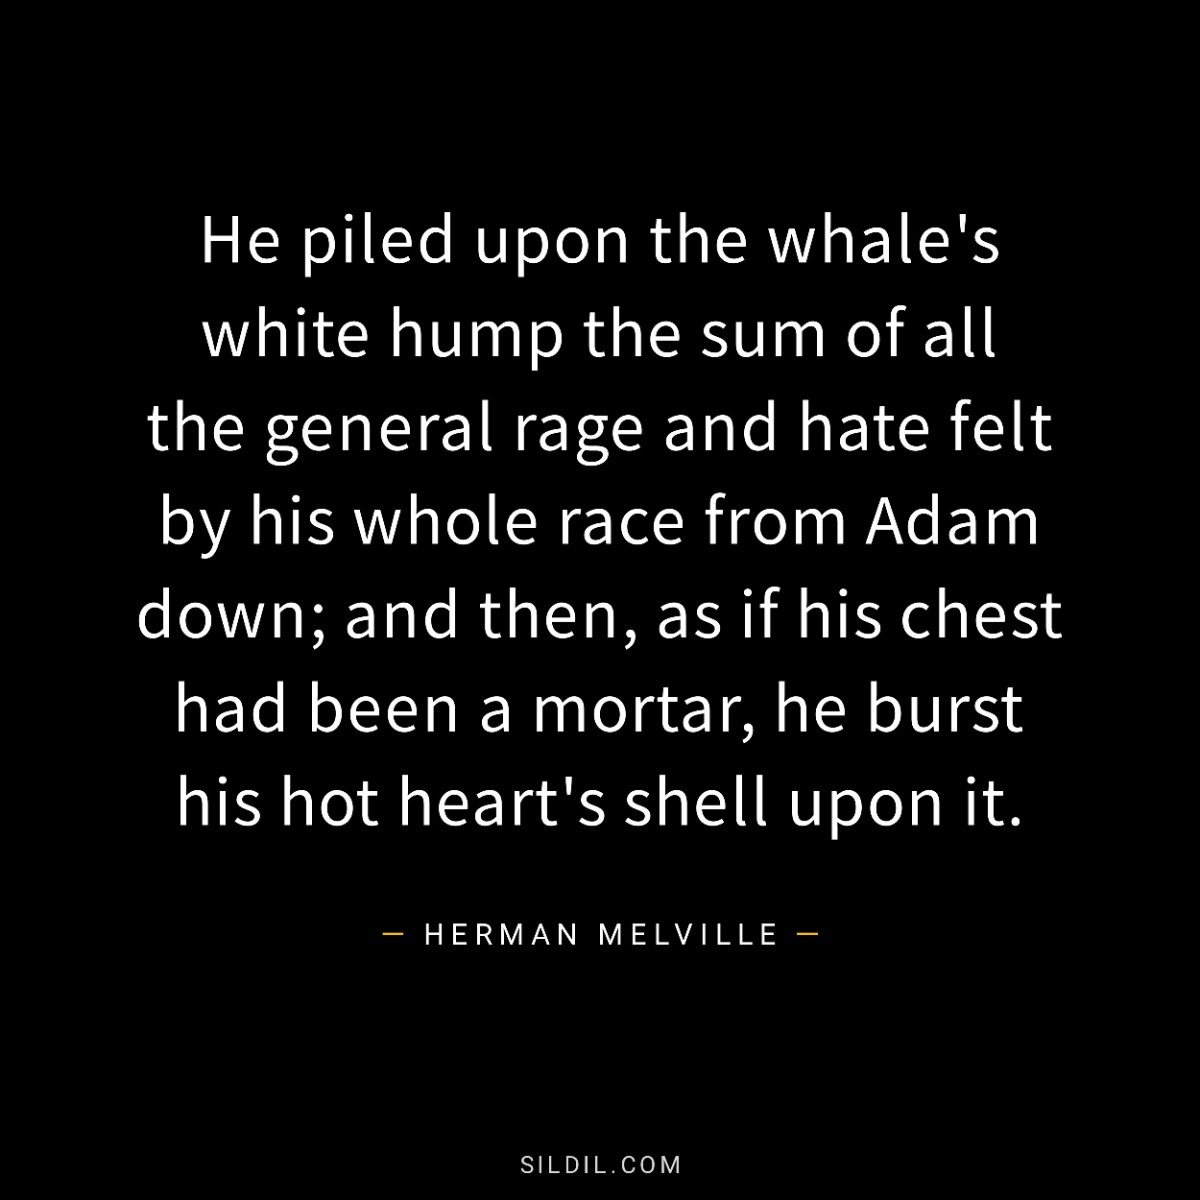 He piled upon the whale's white hump the sum of all the general rage and hate felt by his whole race from Adam down; and then, as if his chest had been a mortar, he burst his hot heart's shell upon it.